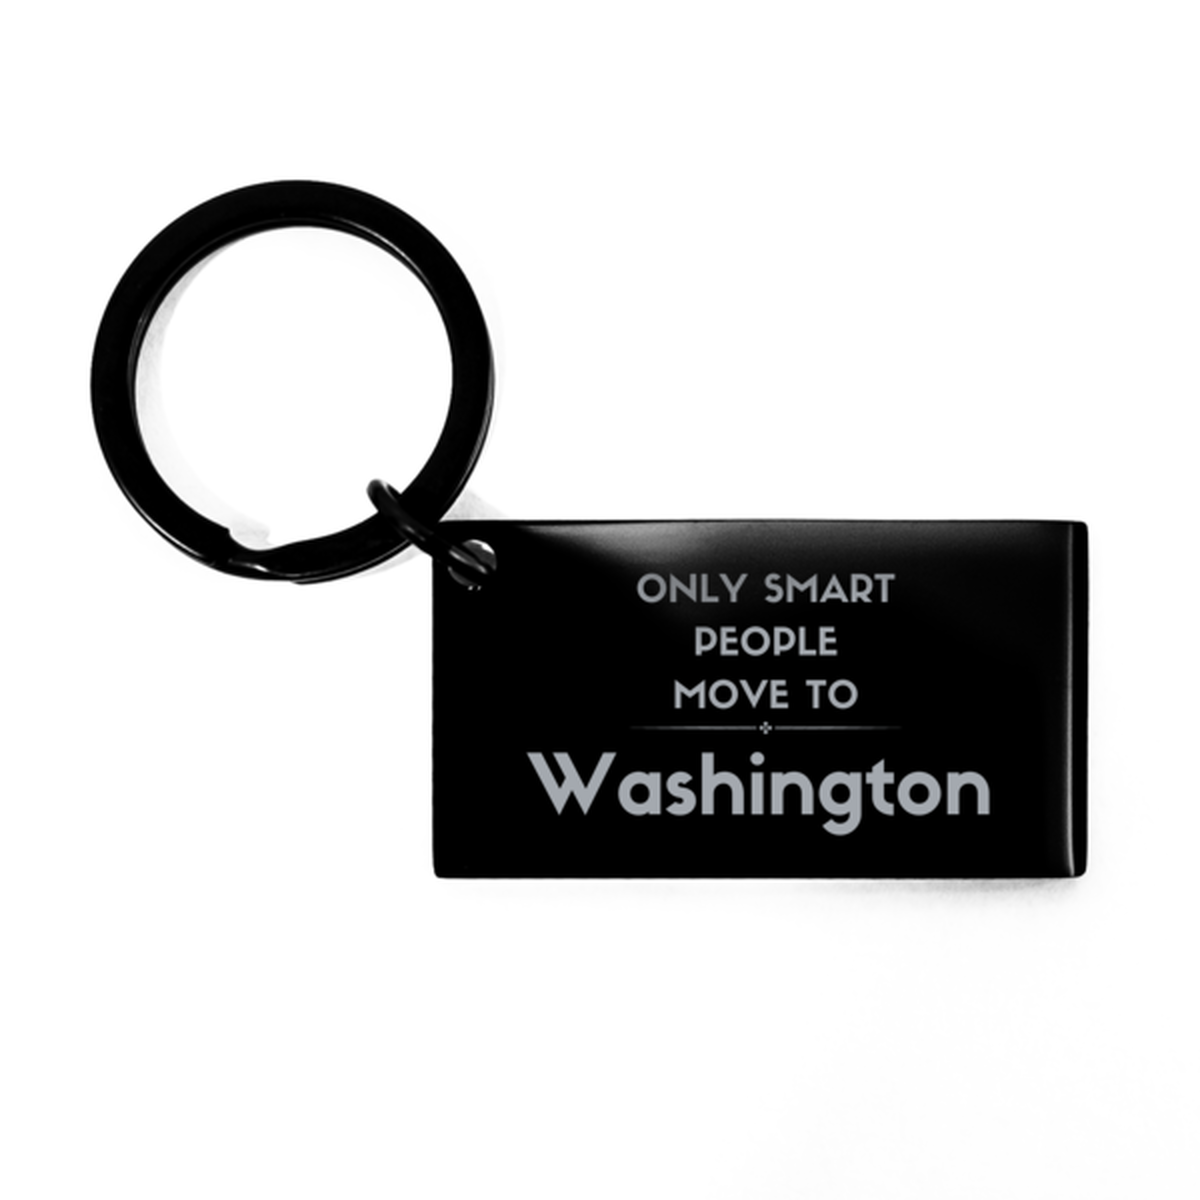 Only smart people move to Washington Keychain, Gag Gifts For Washington, Move to Washington Gifts for Friends Coworker Funny Saying Quote